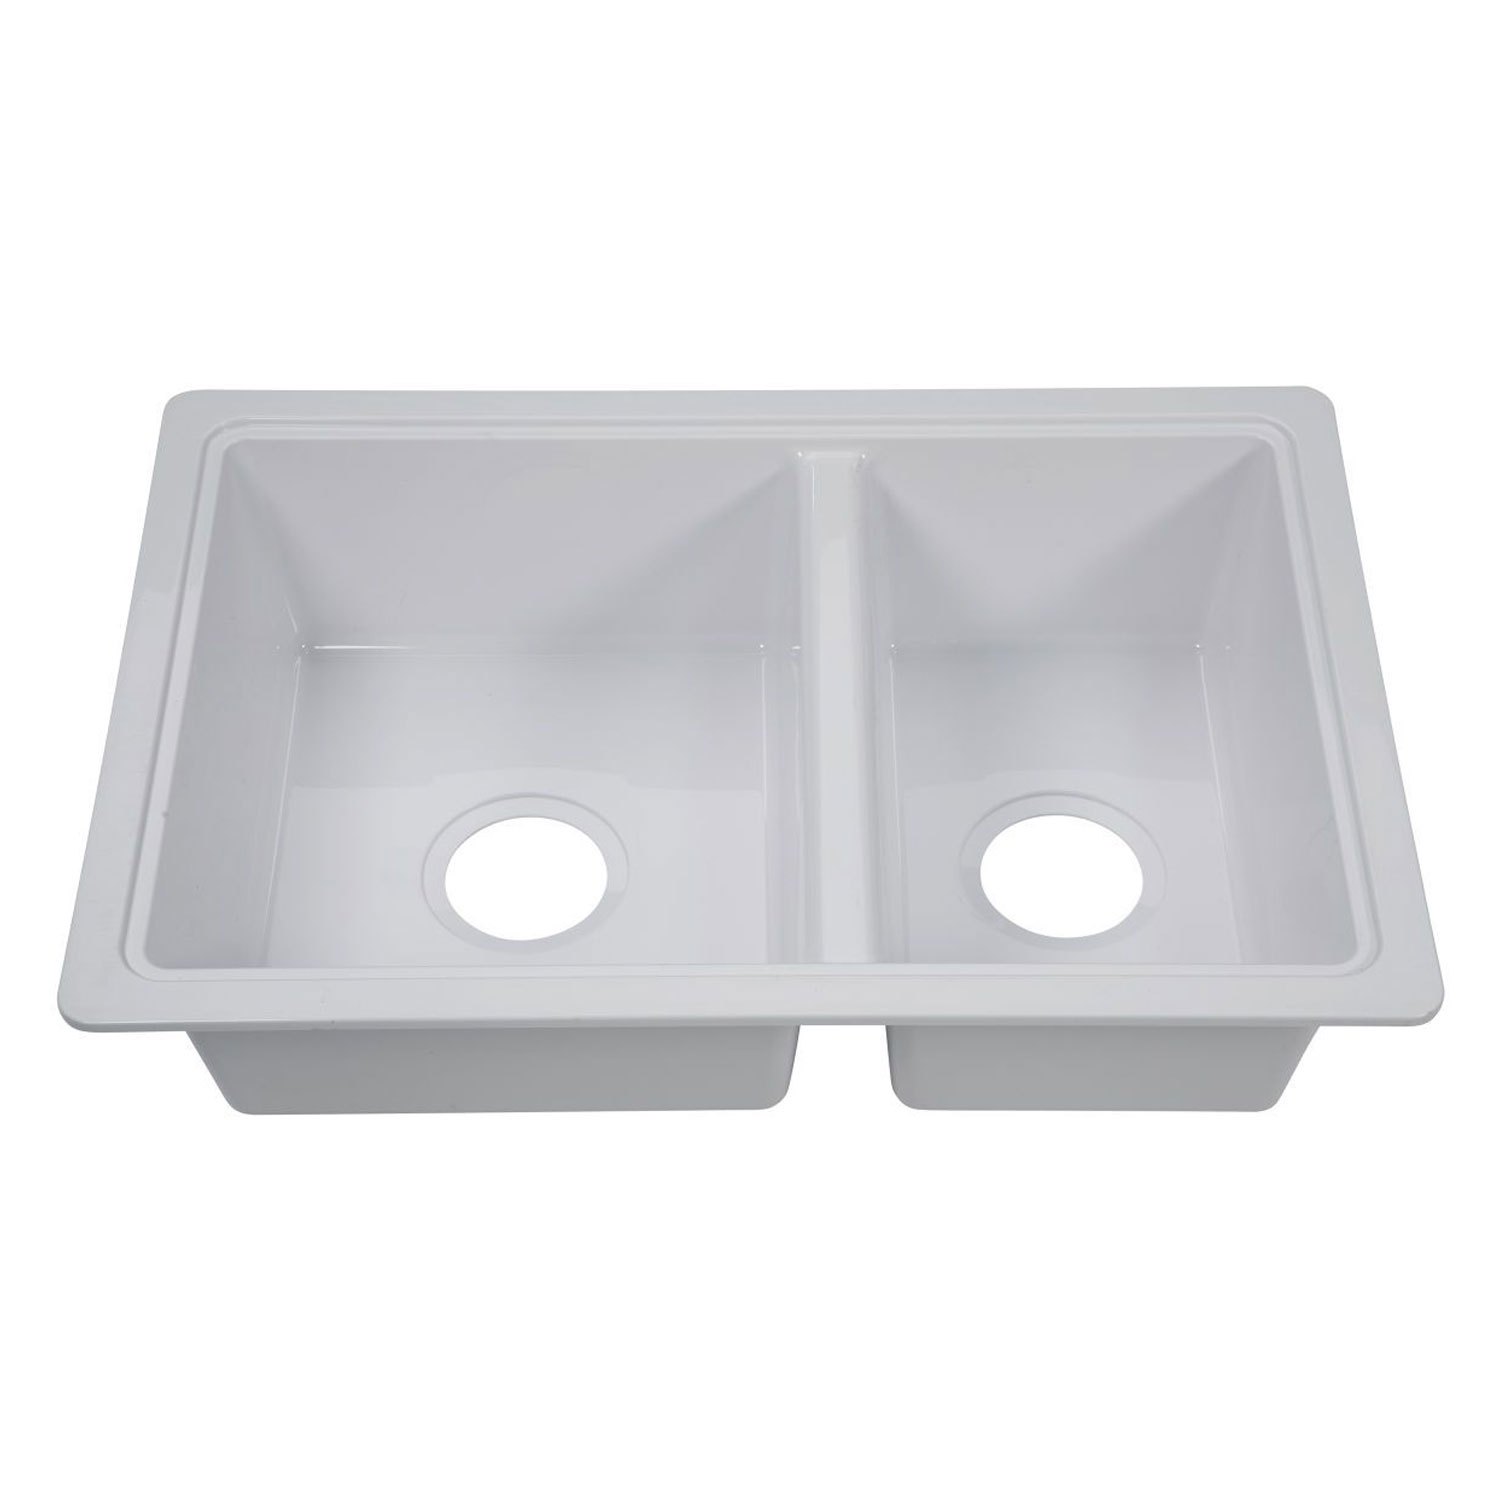 Are Acrylic Kitchen Sinks Durable?